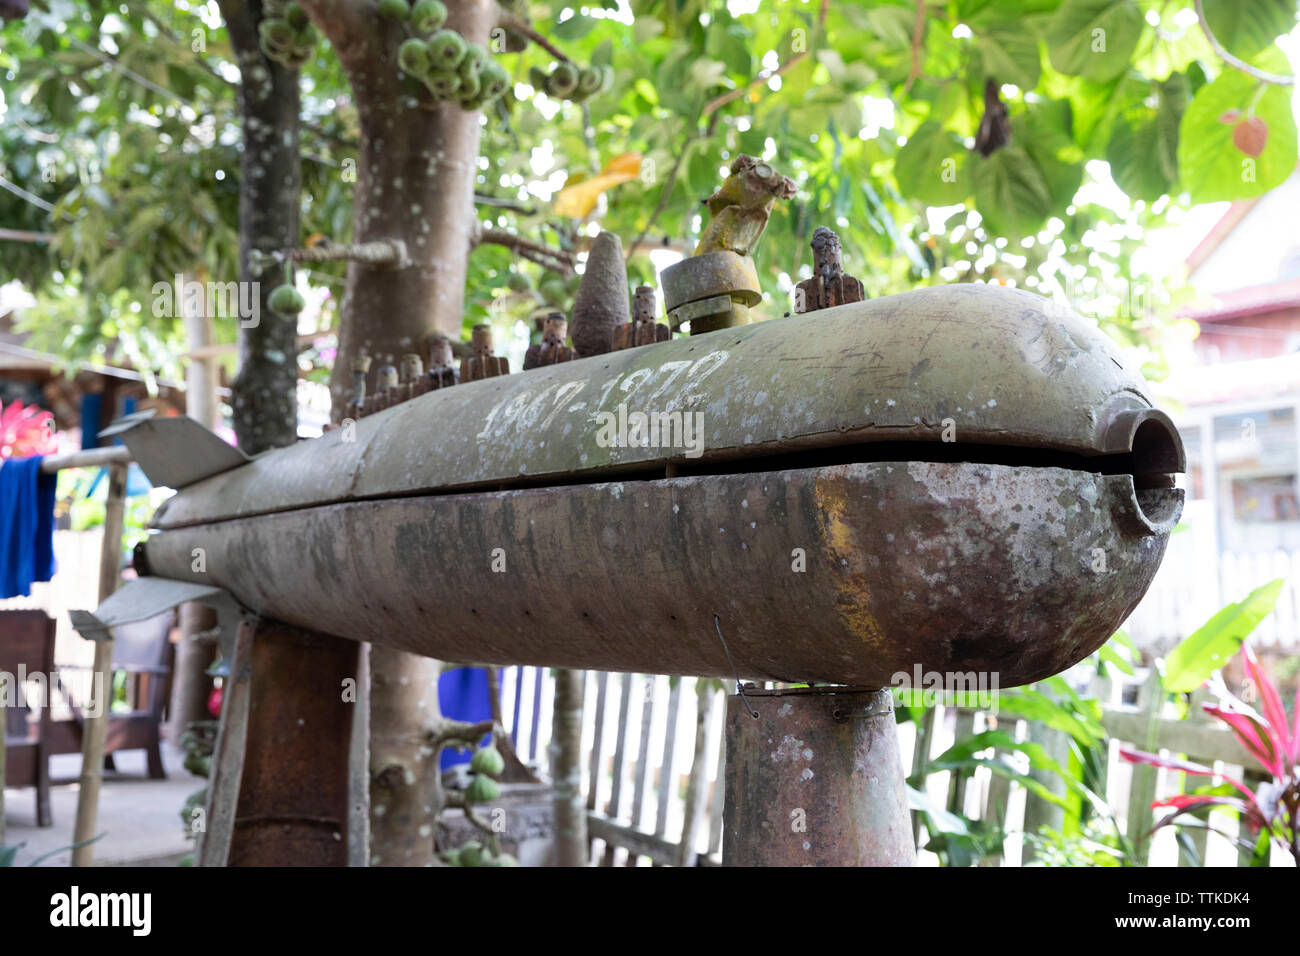 Casing of American cluster bomb dropped on Laos between 1967 to 1972 on display in restaurant garden, Muang Ngoi Neua, Muang Ngoi District, Luang Prab Stock Photo